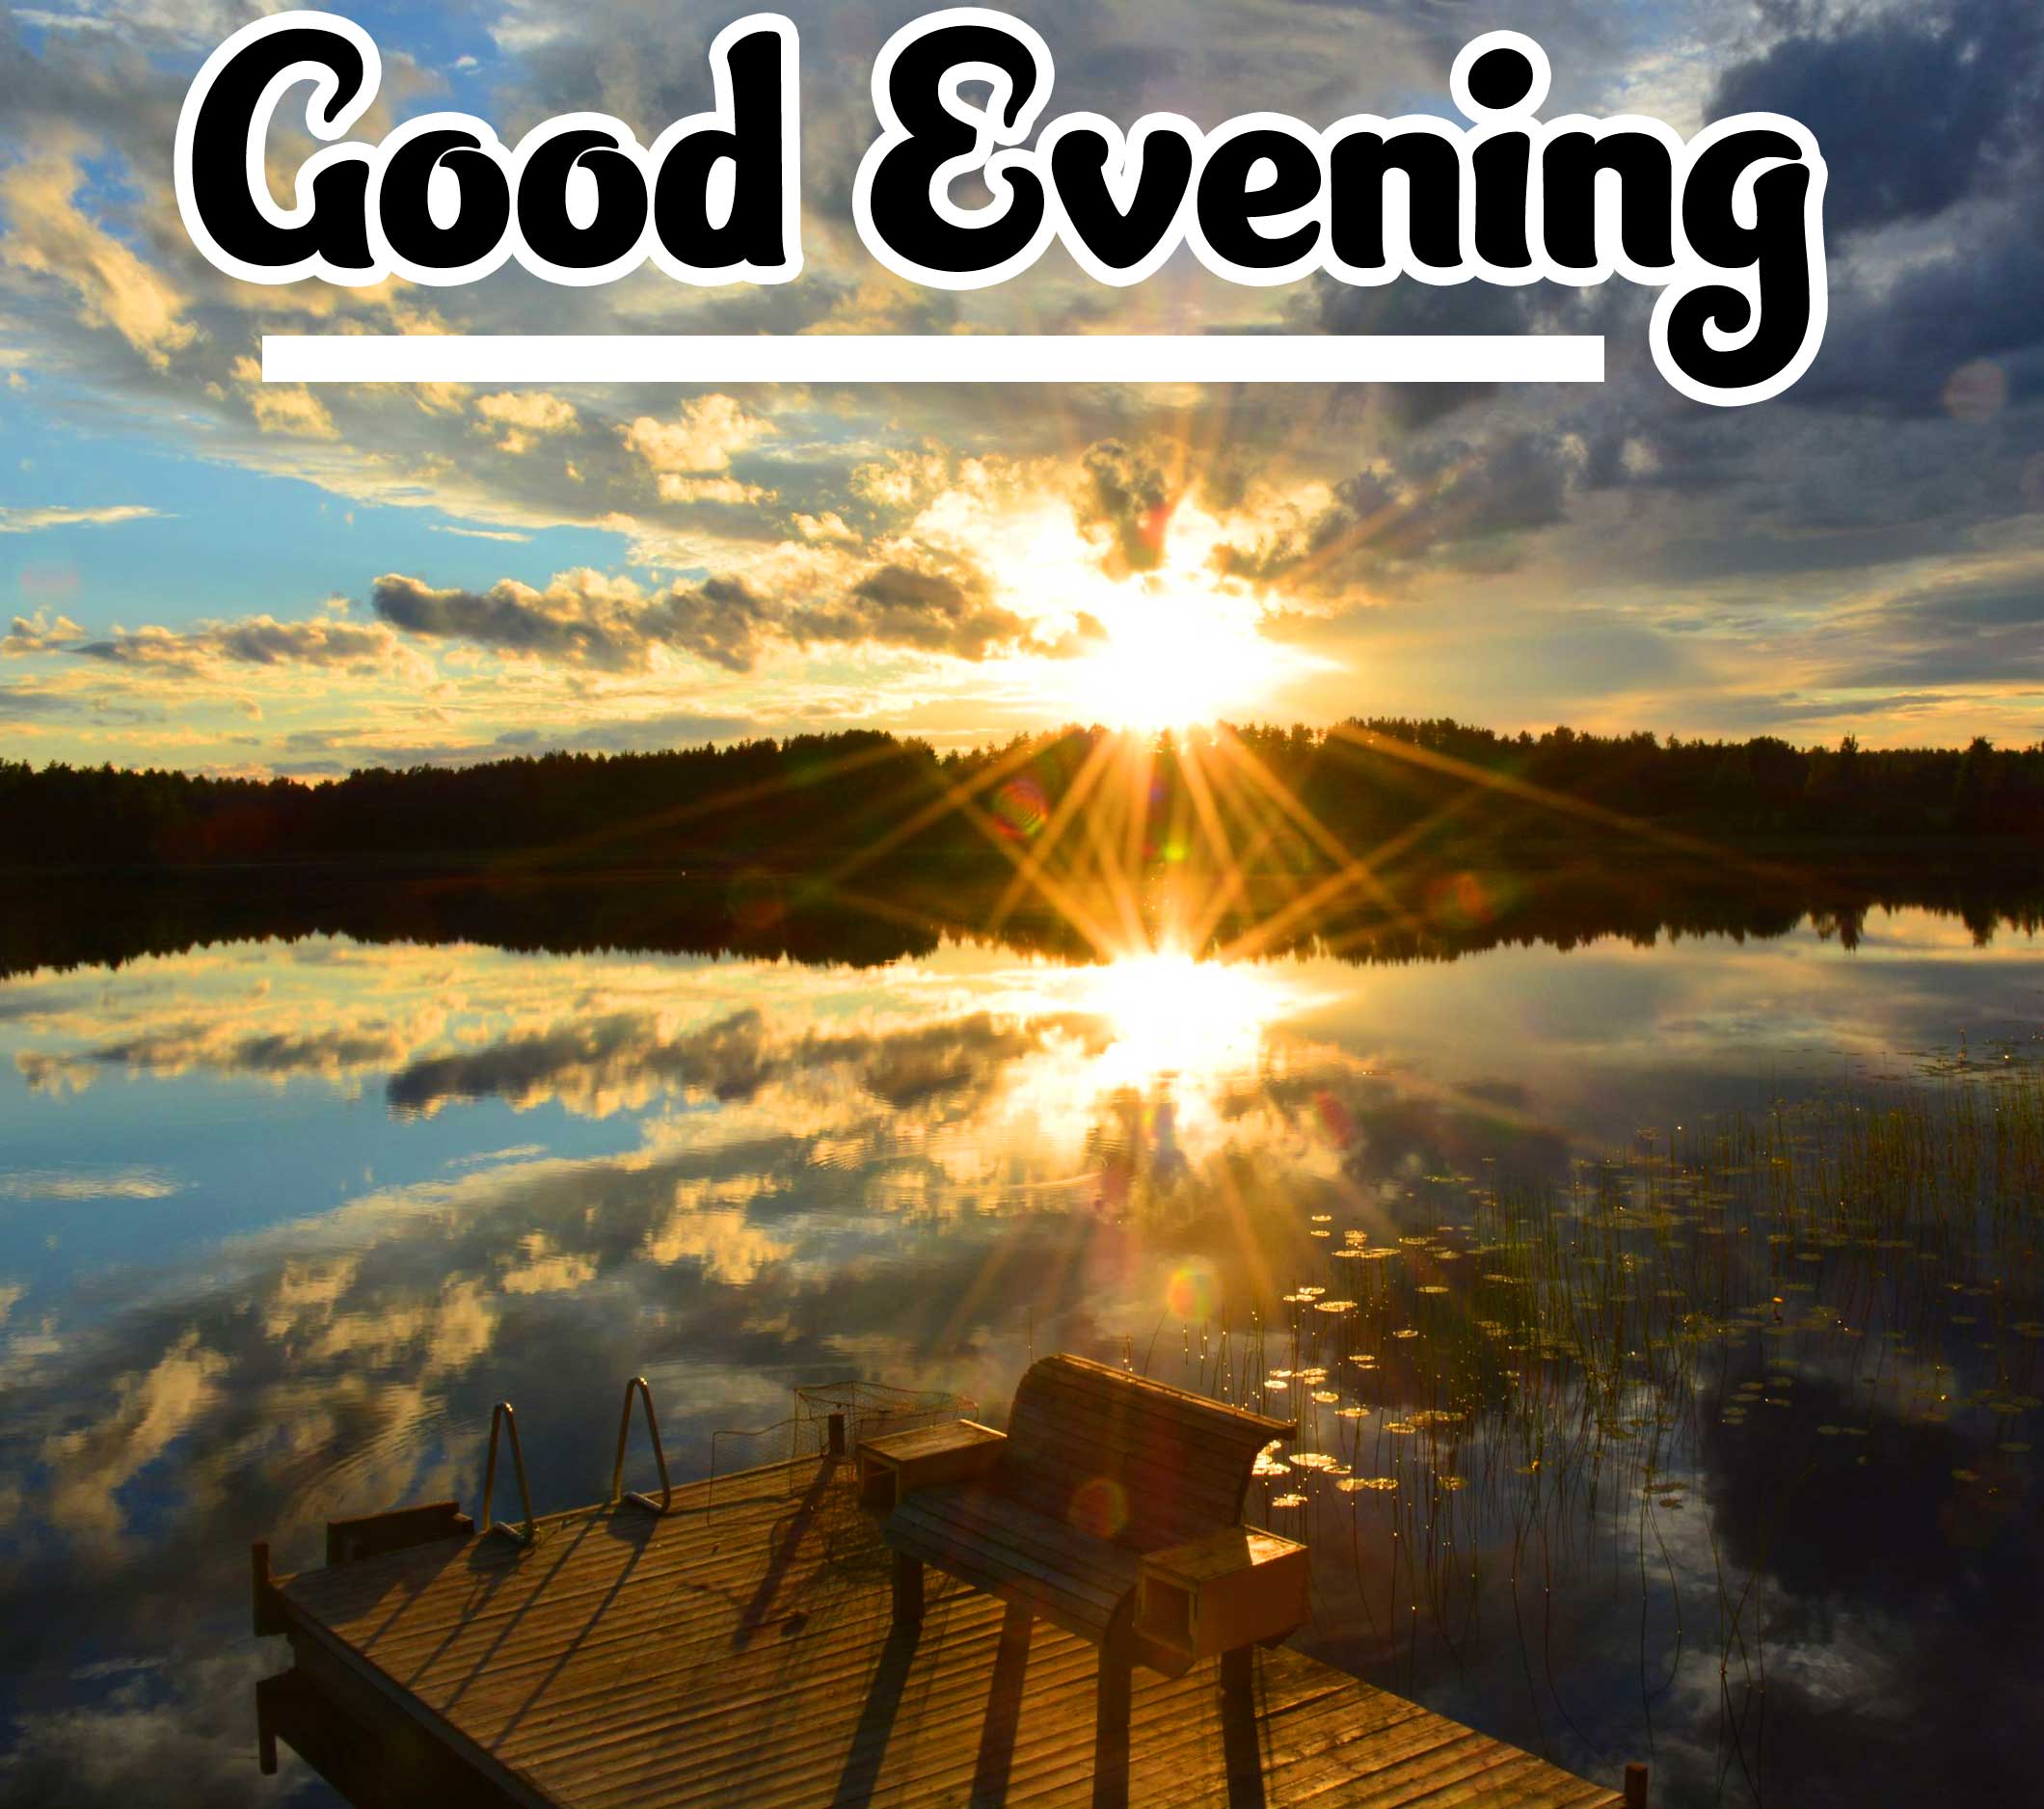 Beautiful Good Evening Wishes Images Pics Latest Download 